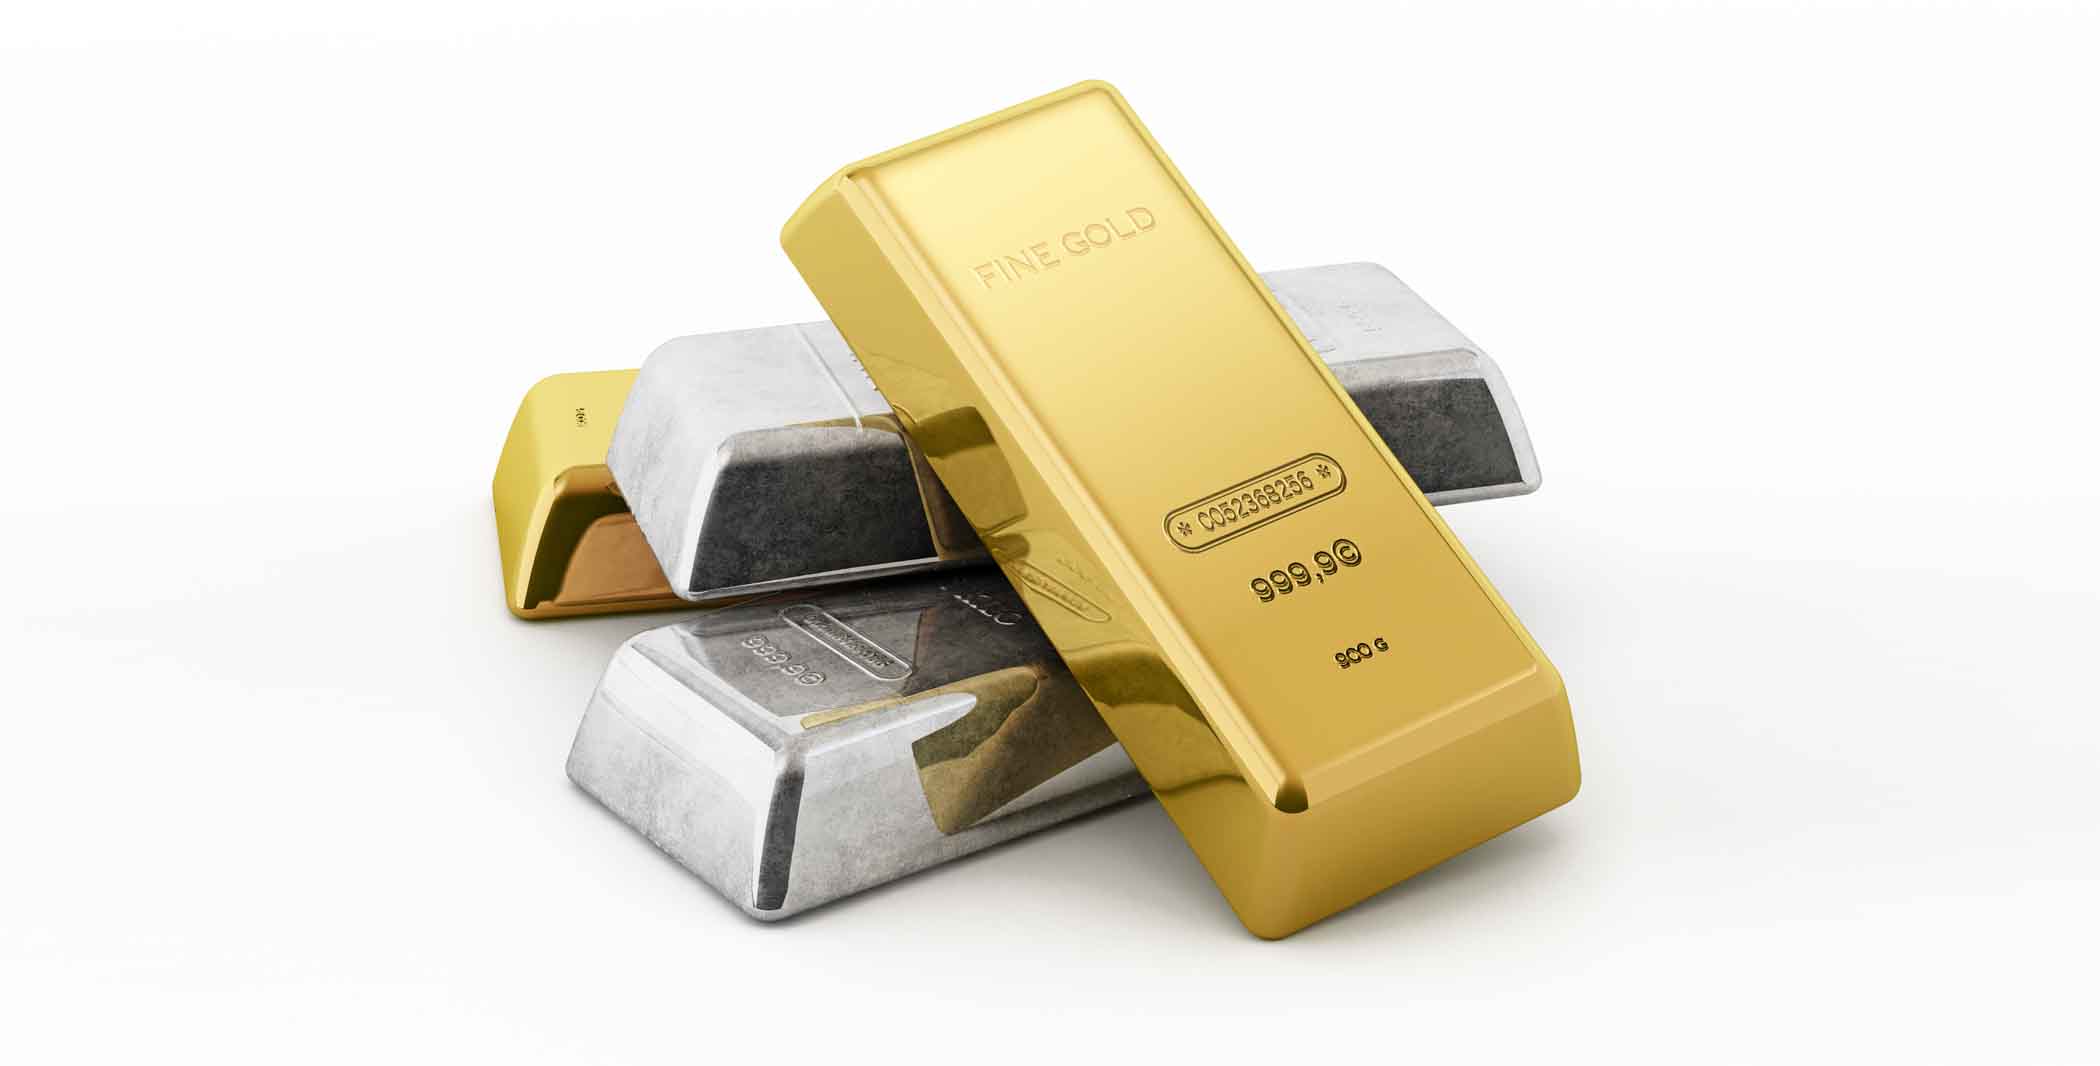 Do Gold exchange plans offer more generous coverage than Bronze or Silver plans?